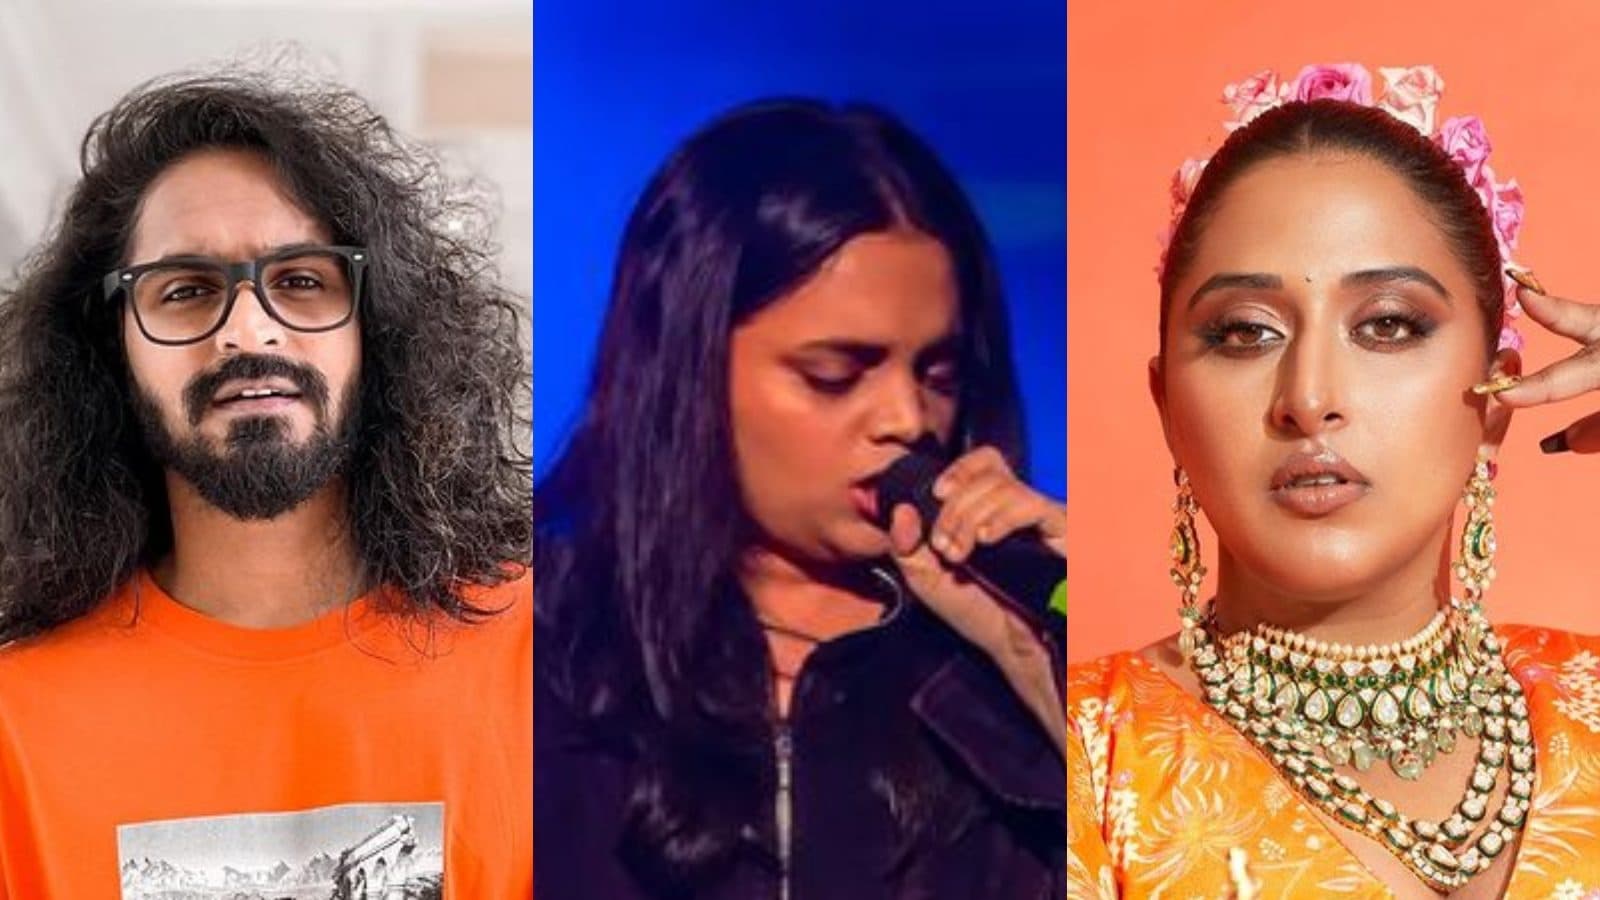 Emiway Bantai, Raja Kumari, Srushti Tawade: Once on the Fringe, Indian Rappers Now Are ‘More Confident’ And ‘Don’t Need’ Labels